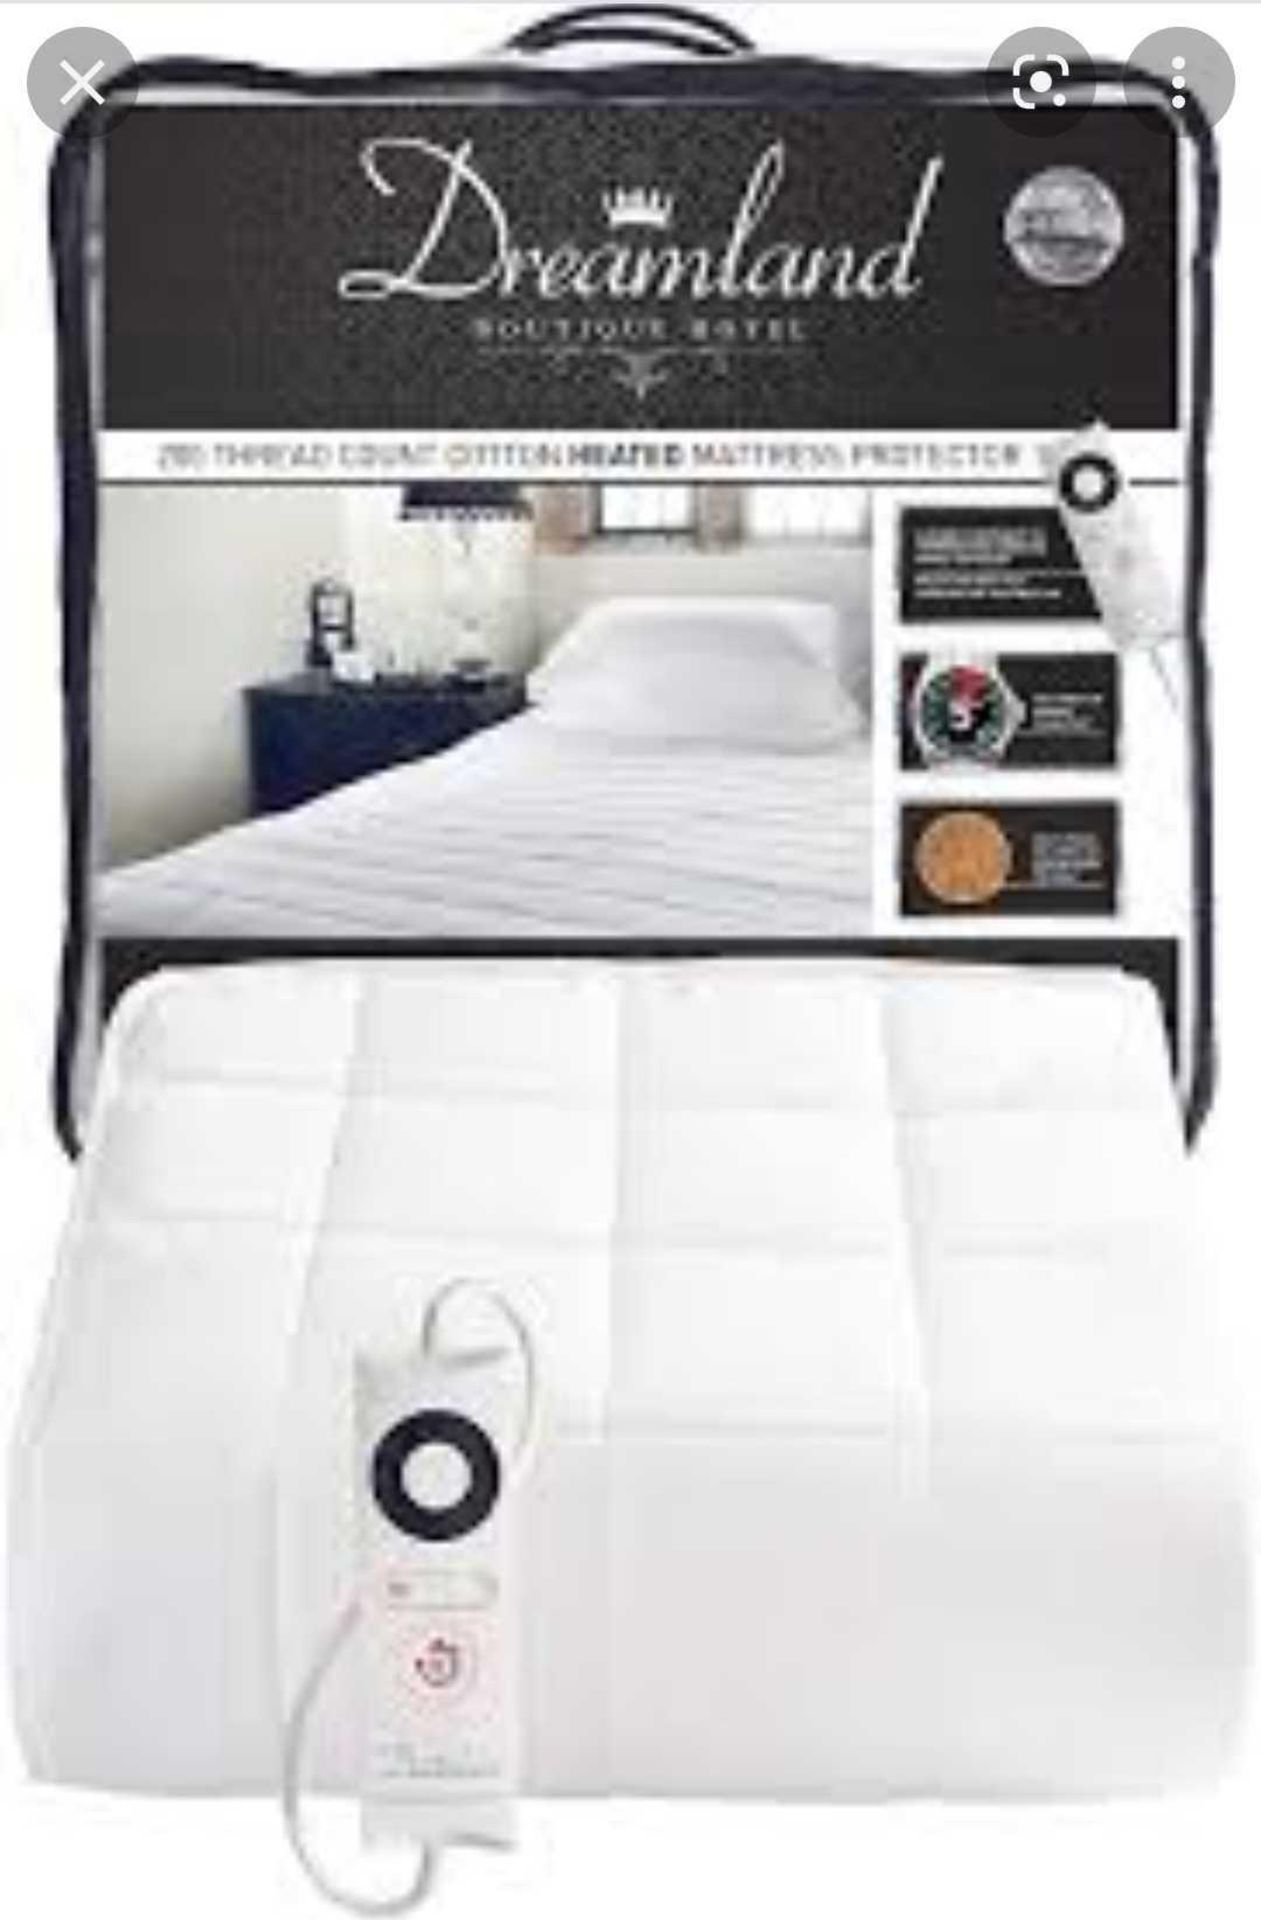 RRP £105 Bagged Dreamland Heated Mattress Protector - Image 2 of 4